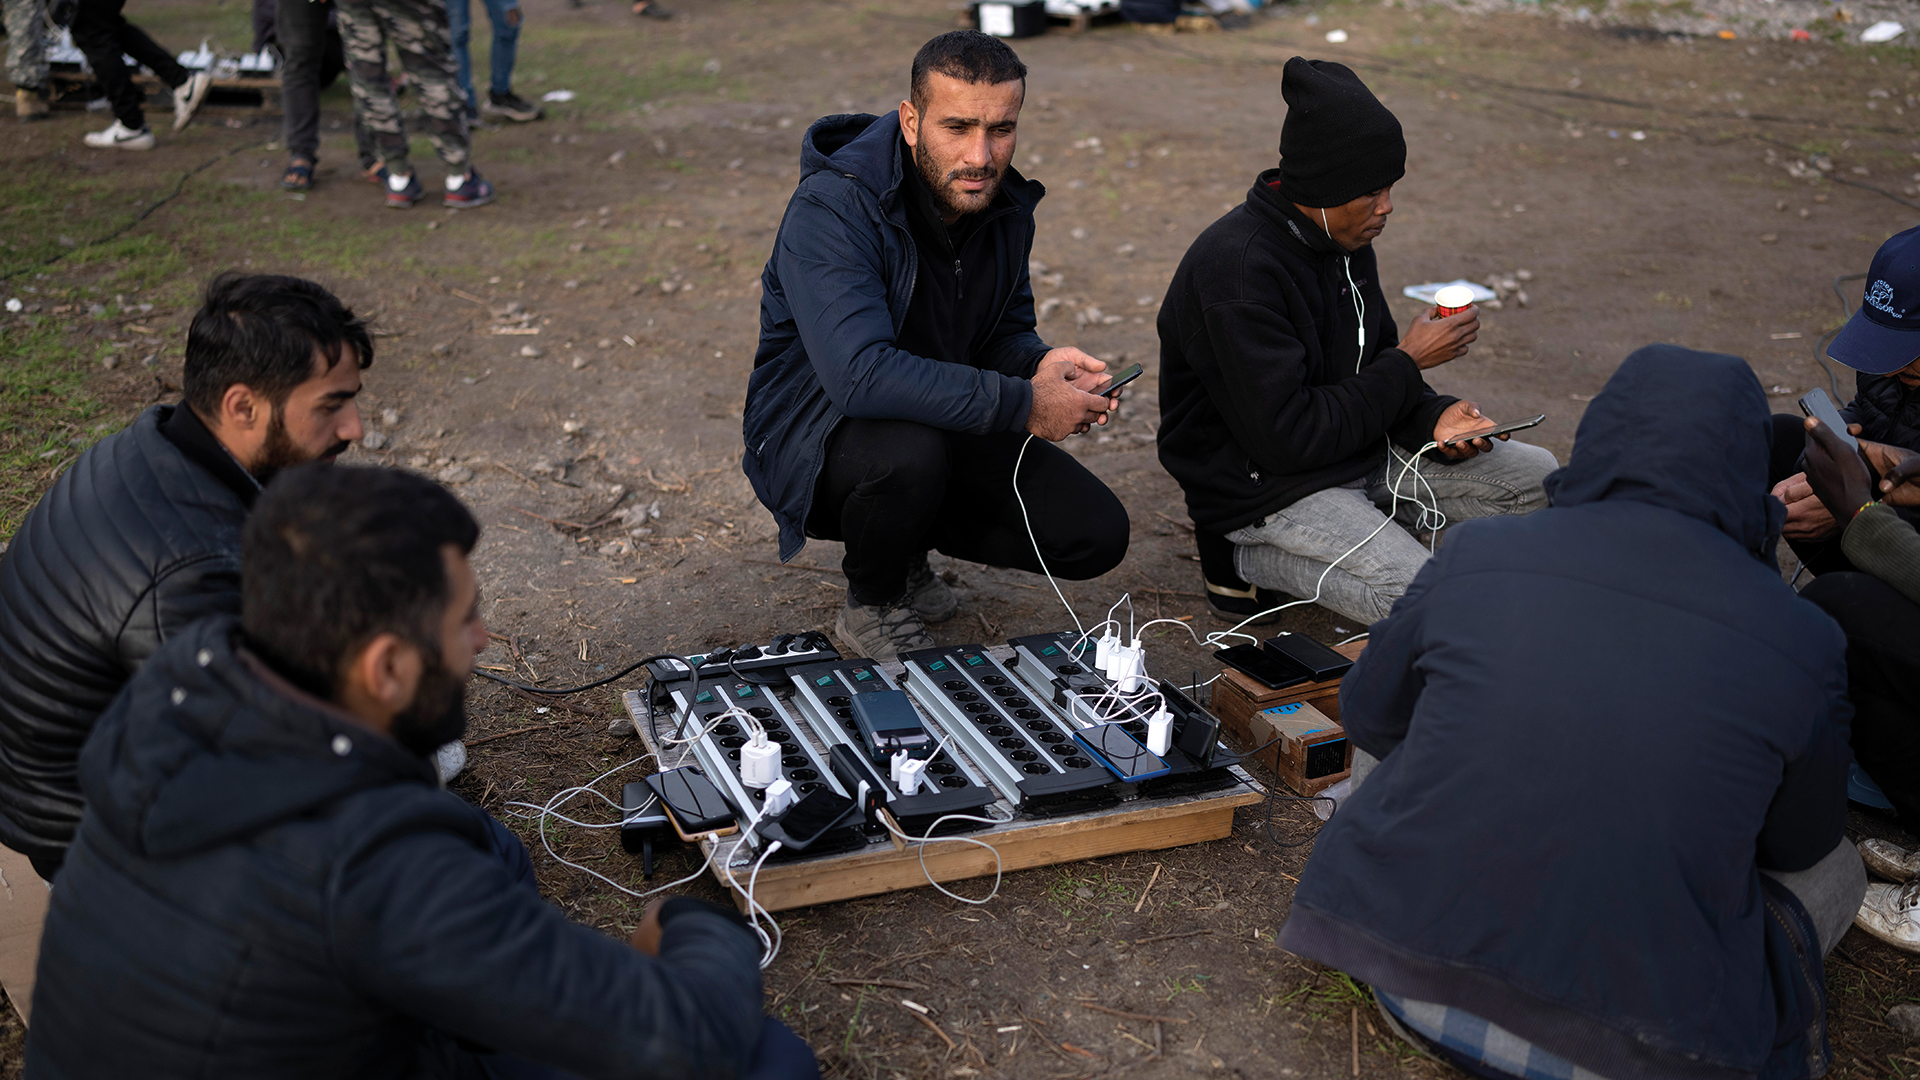 Refugees charge the phones powered by a generator from the refugee crisis charity Care4Calais on November 02, 2022 in Dunkerque, France. Photo: Christopher Furlong/Getty Images